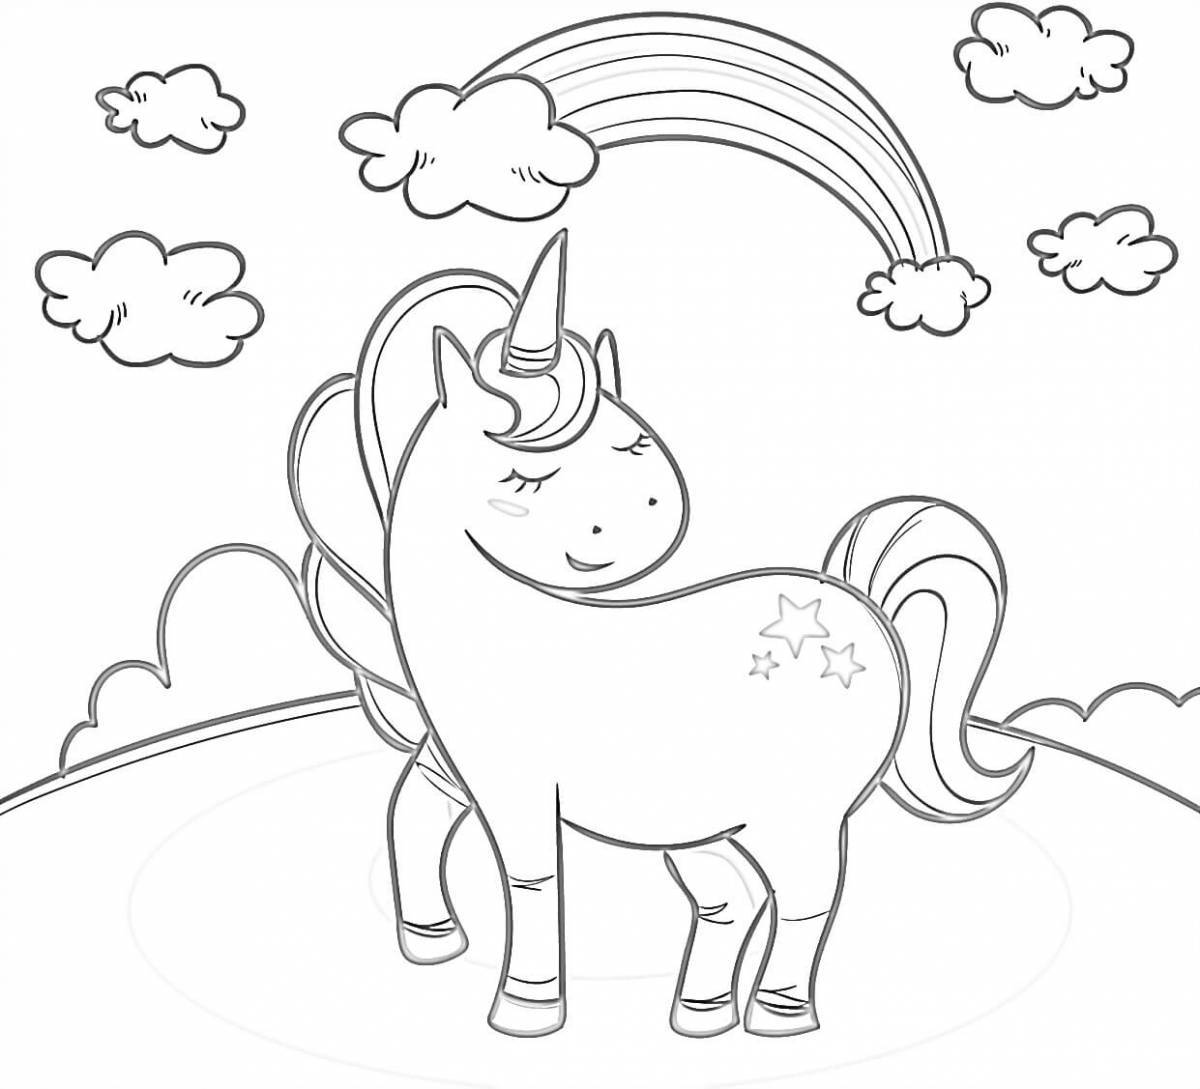 Luminous unicorn coloring book for kids 6-7 years old